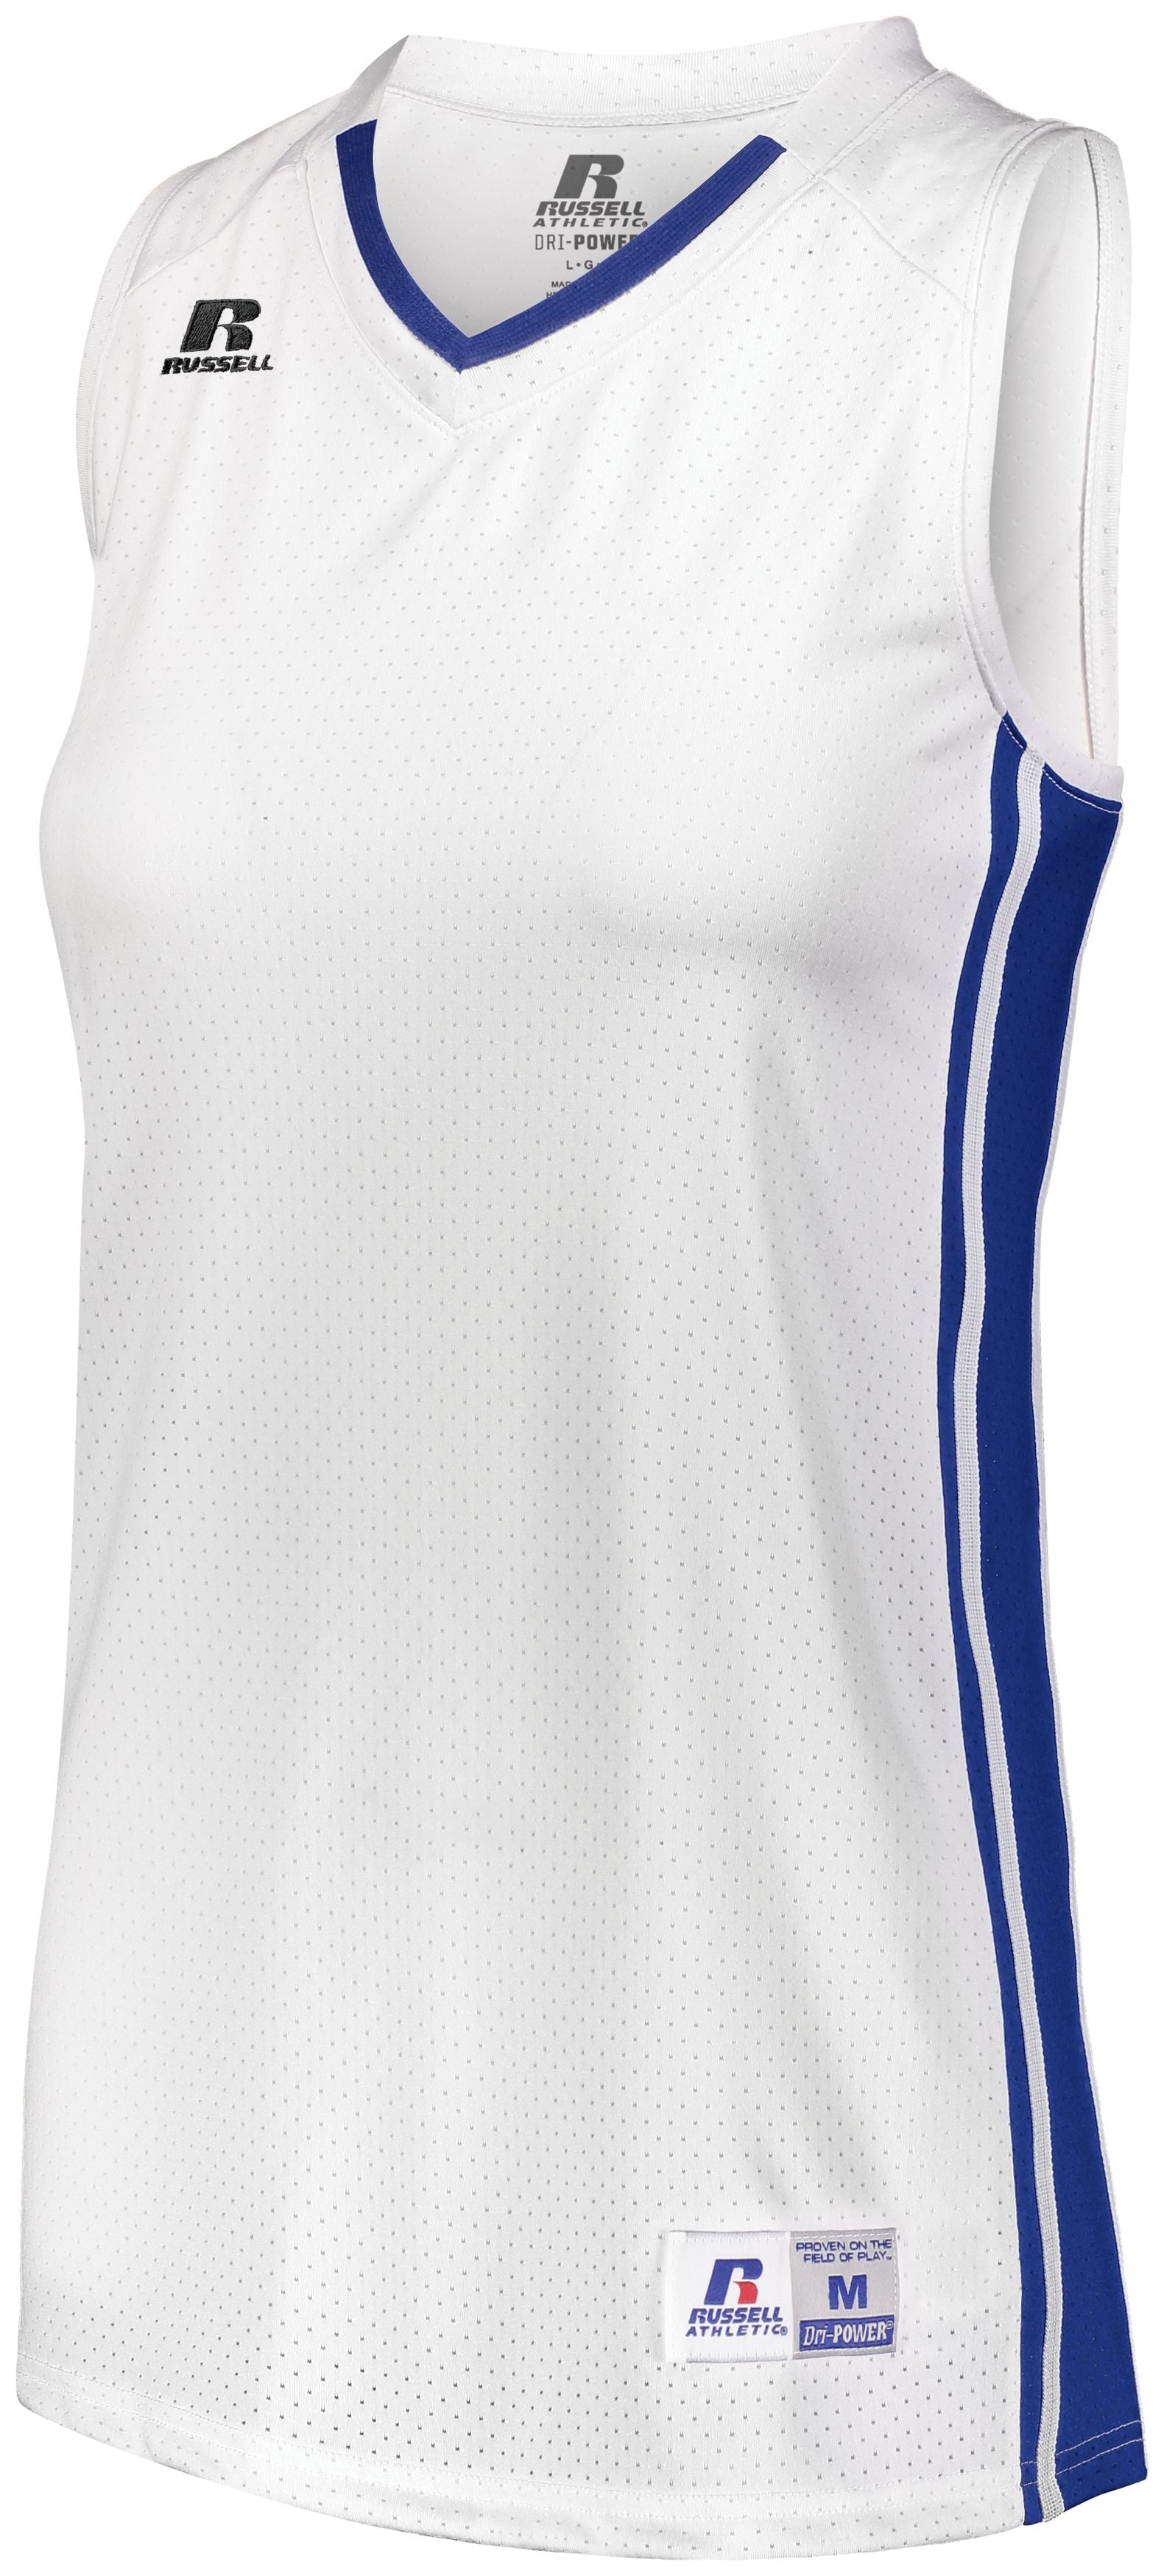 Russell Athletic Ladies Legacy Basketball Jersey in White/Royal  -Part of the Ladies, Ladies-Jersey, Basketball, Russell-Athletic-Products, Shirts, All-Sports, All-Sports-1 product lines at KanaleyCreations.com